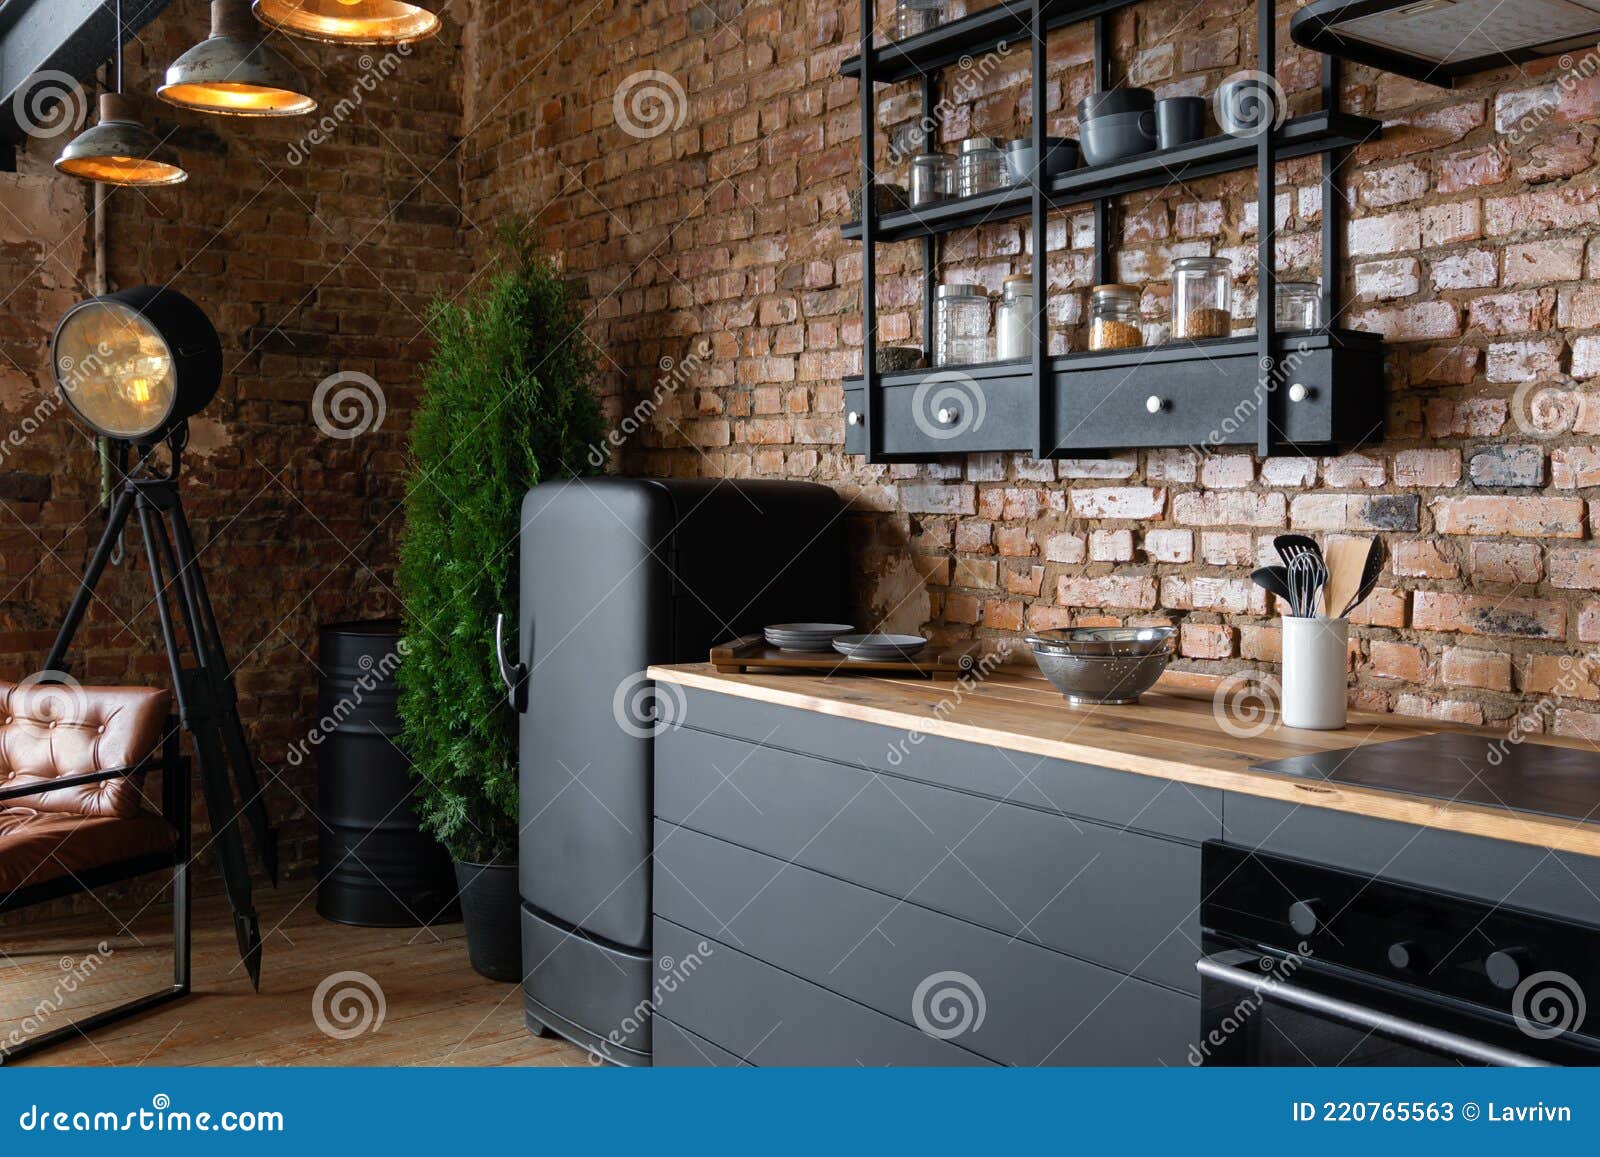 Side View on an Open Space Industrial Loft Kitchen with Vintage ...